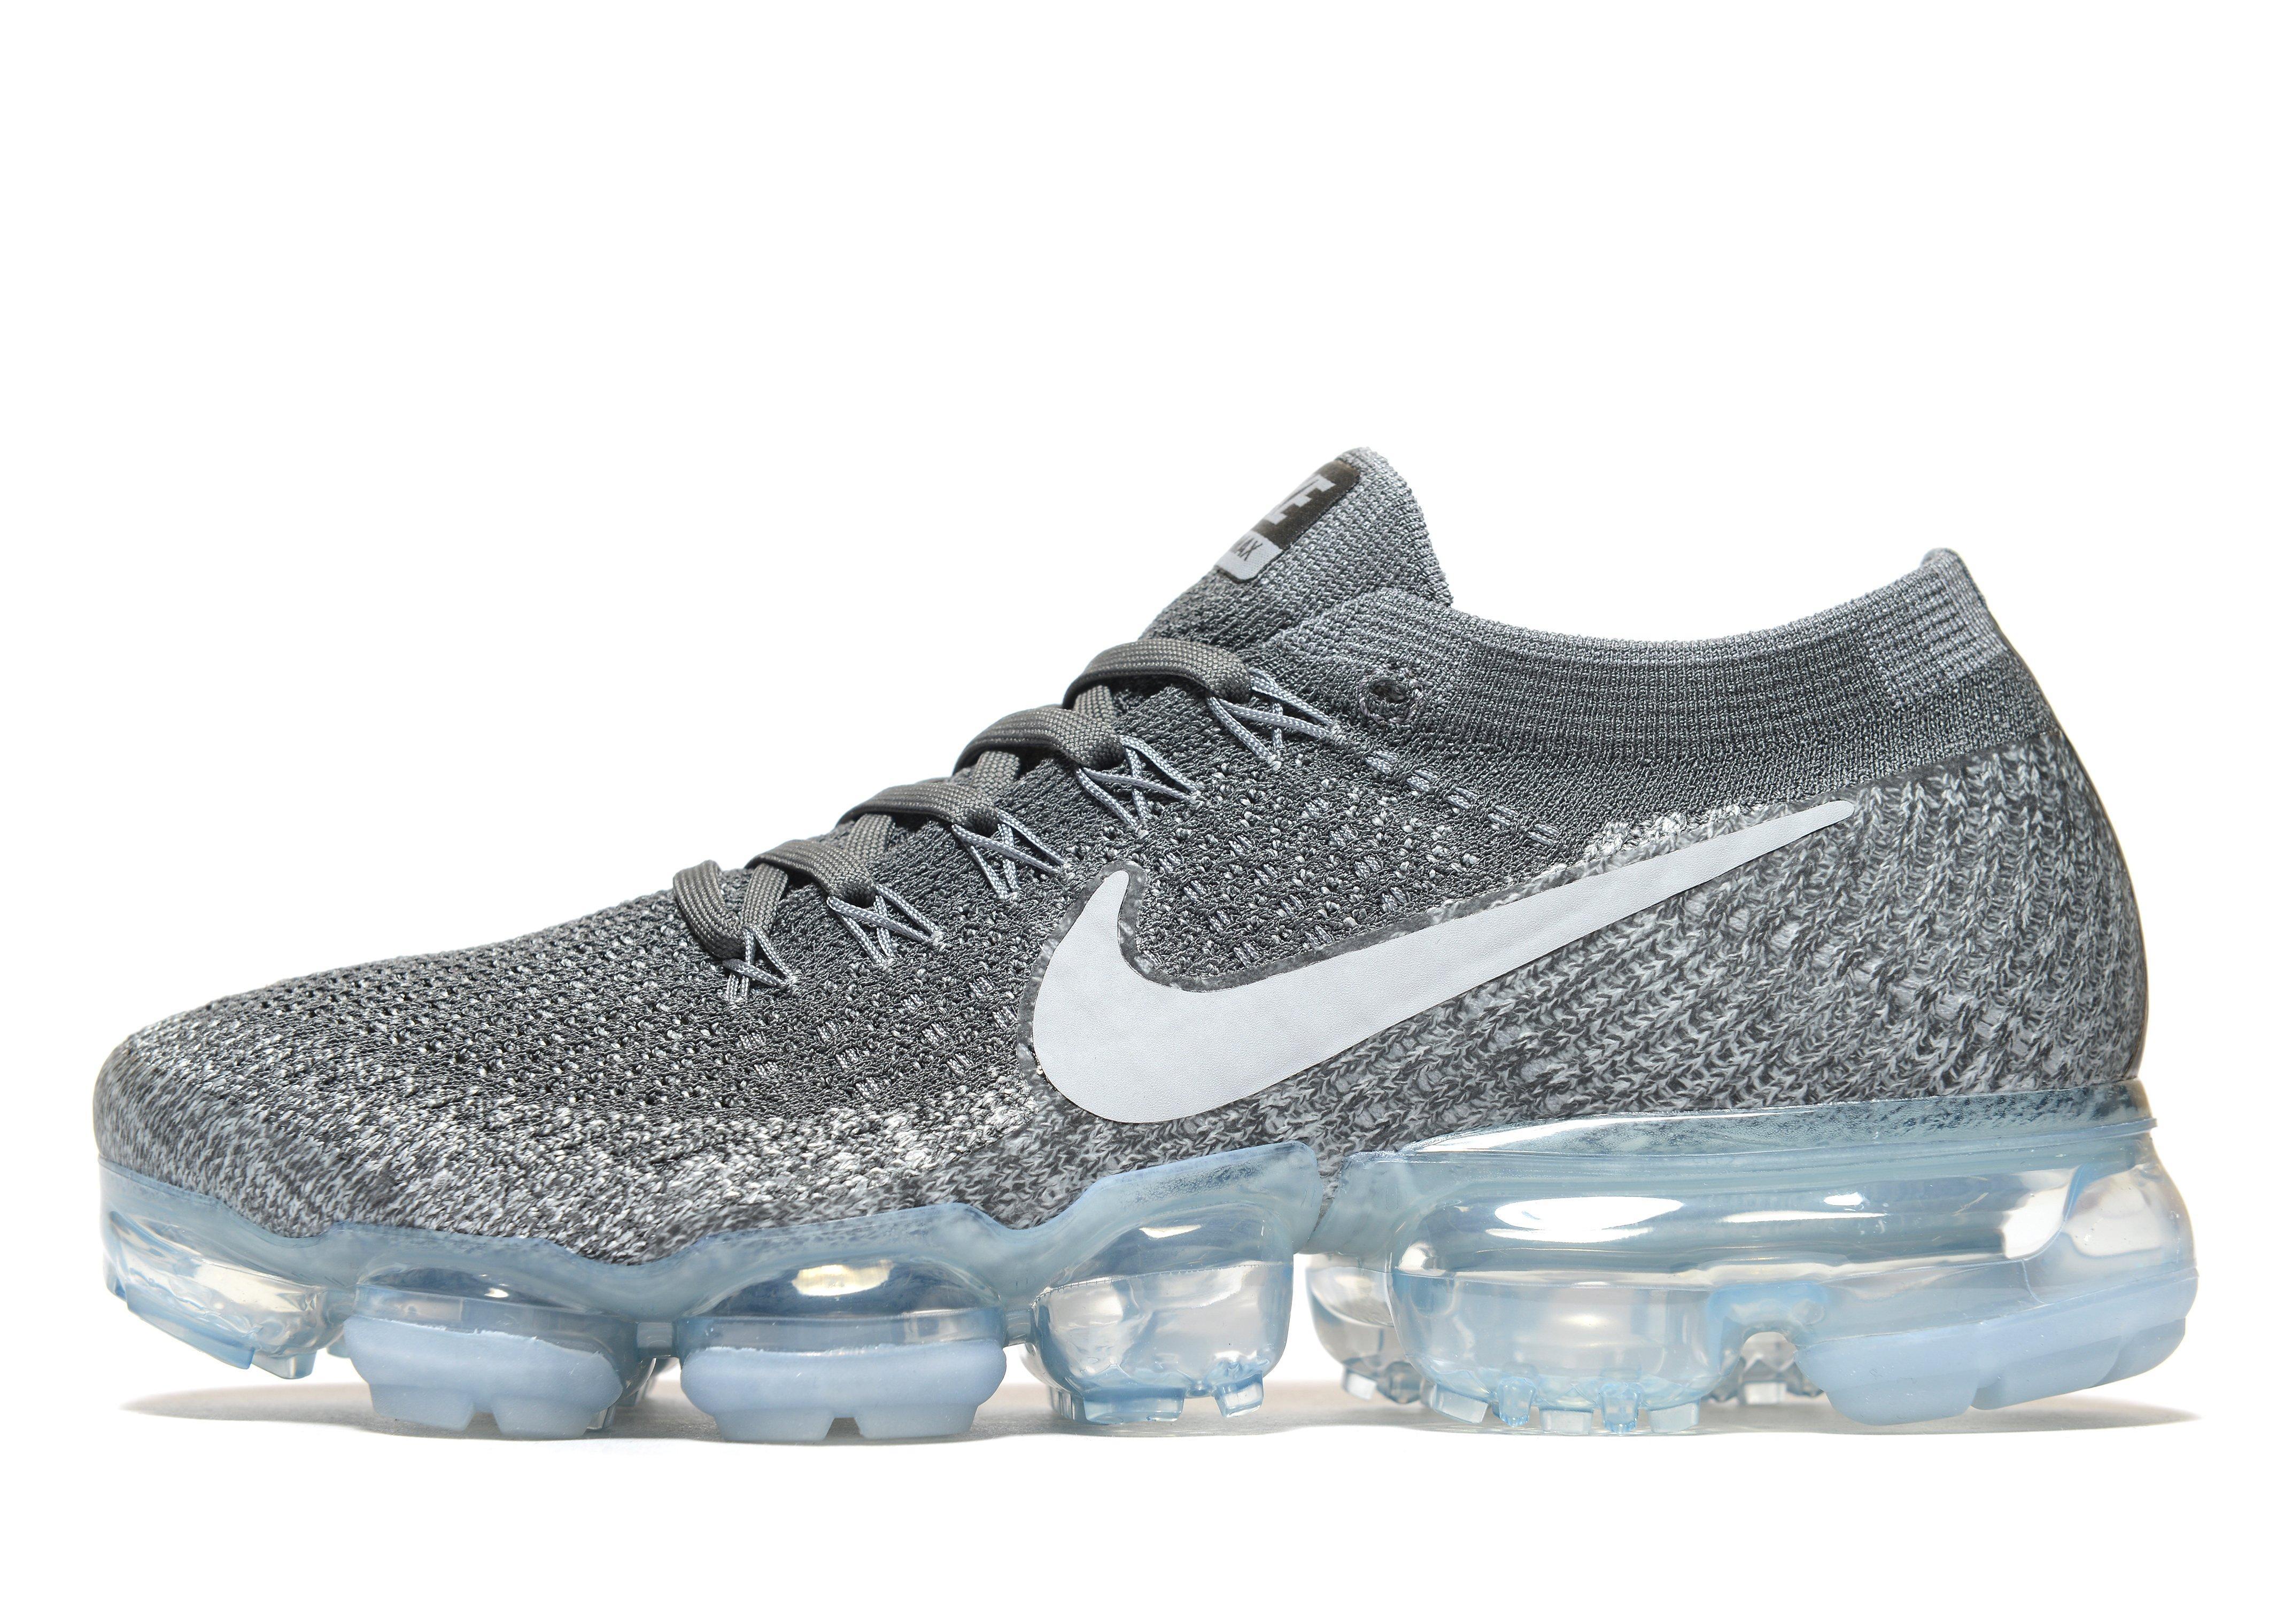 nike air vapormax grey multicolor,Save up to 16%,www.masserv.com